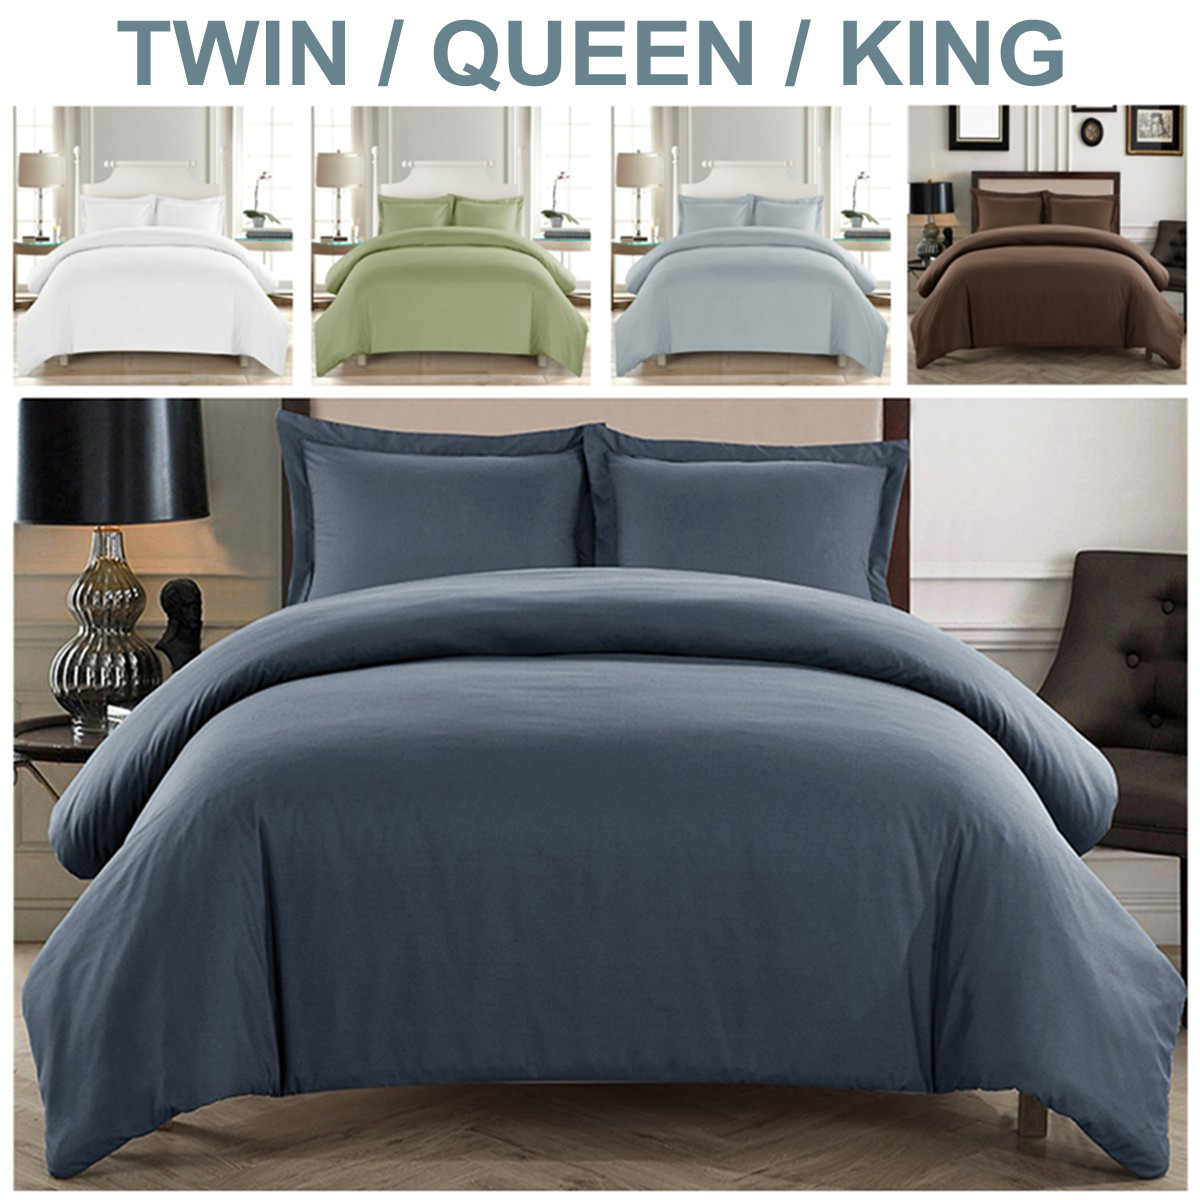 1pc Twin Queen King Size Duvet Quilt Cover With 1 2 Pillow Case